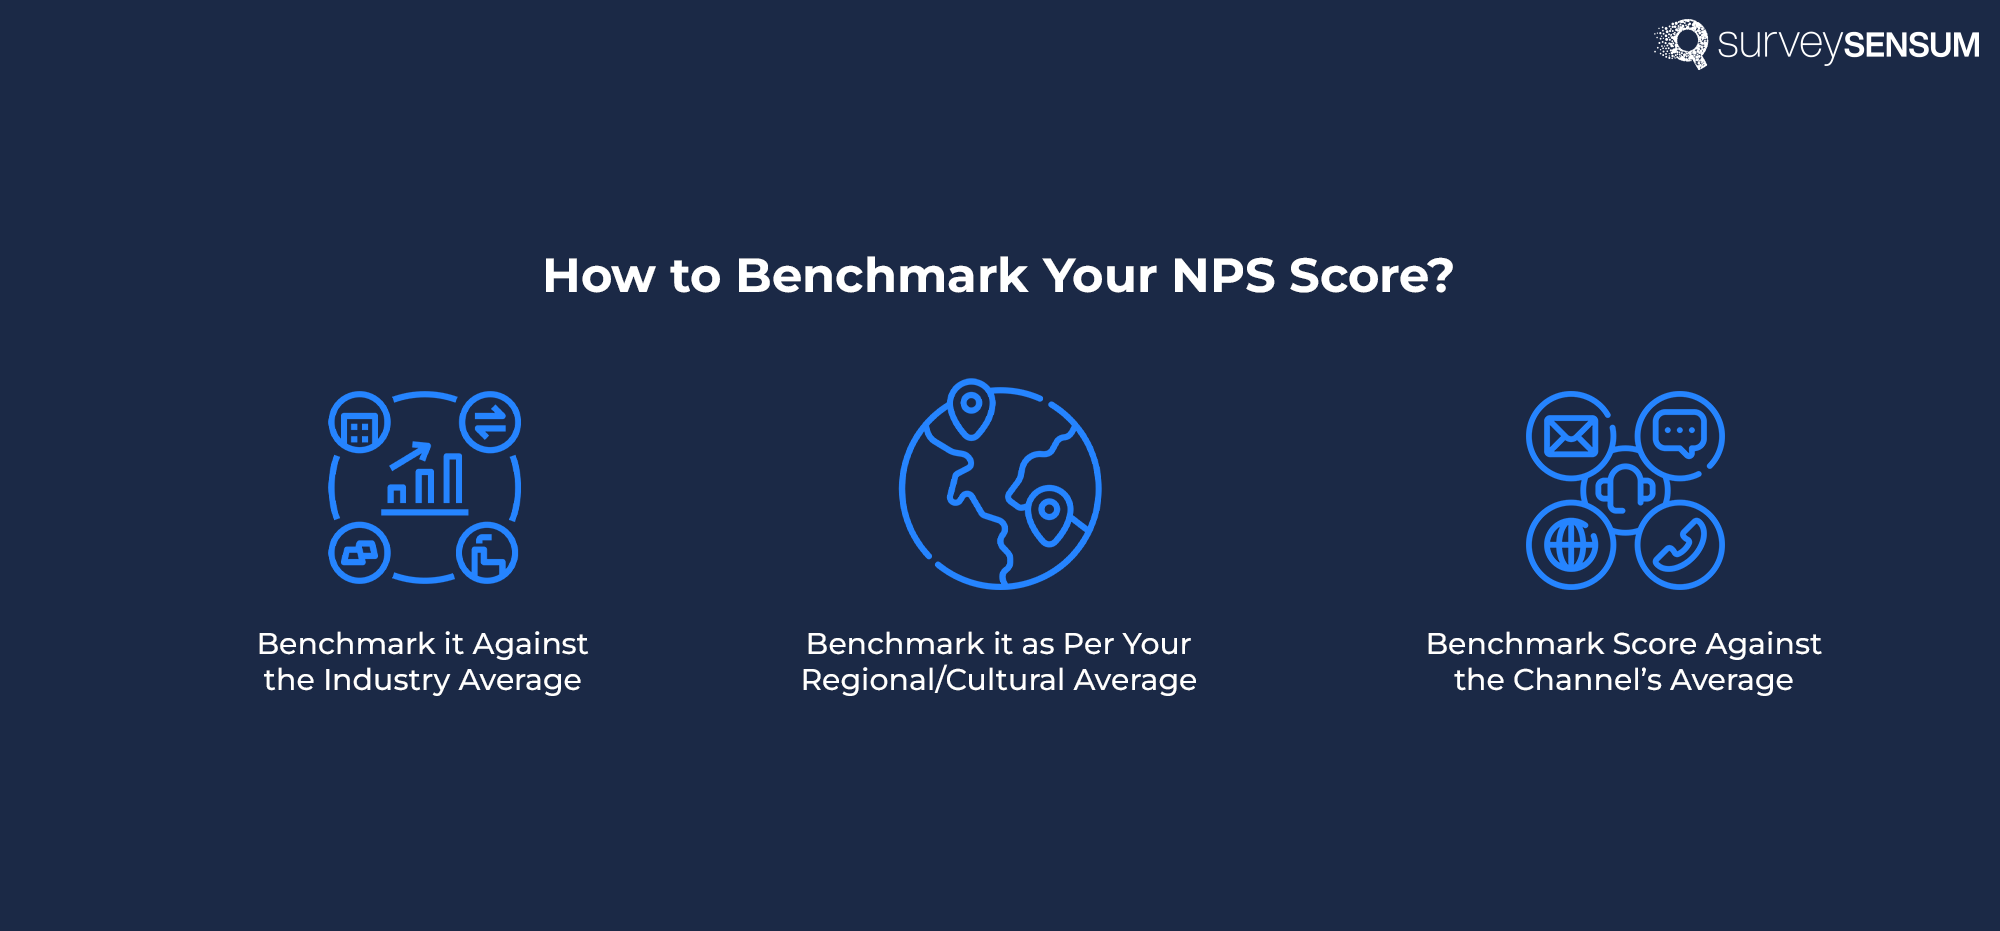 The image shows the three steps of NPS benchmarking - against industry average, regional average, and channel average. 